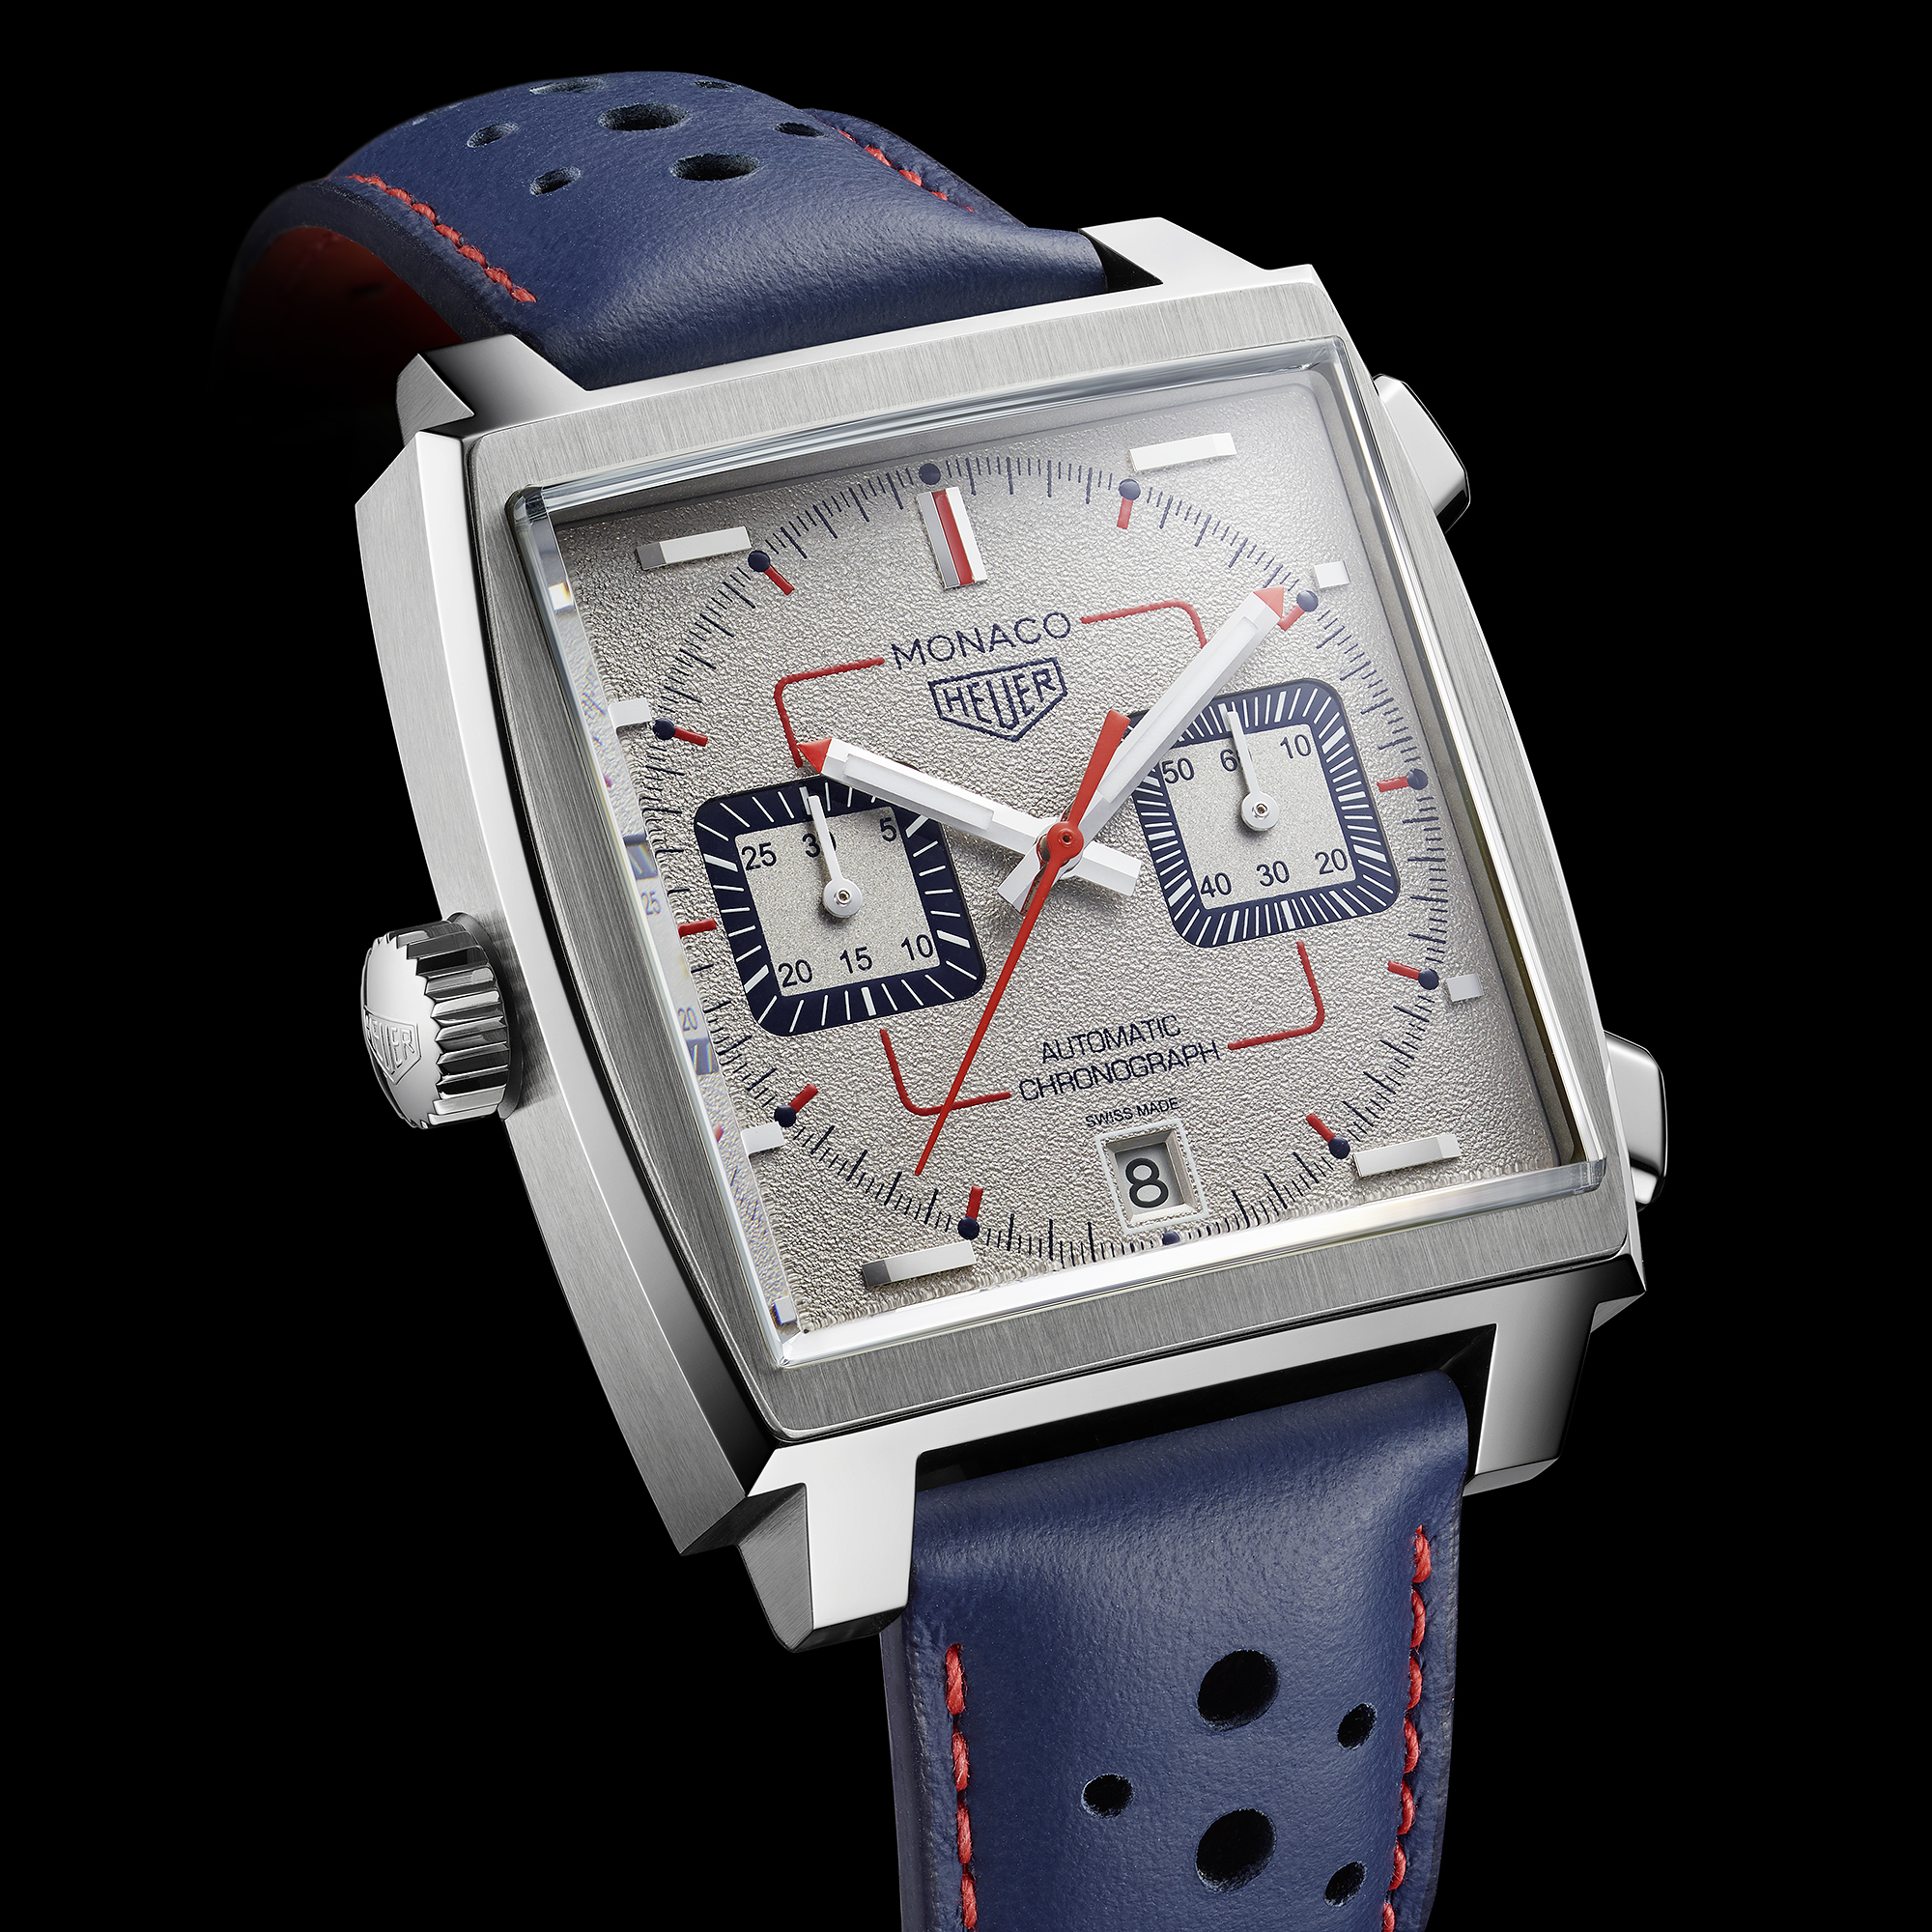 Tag Heuer Presents Third Limited Edition Monaco at Exclusive Event in New York